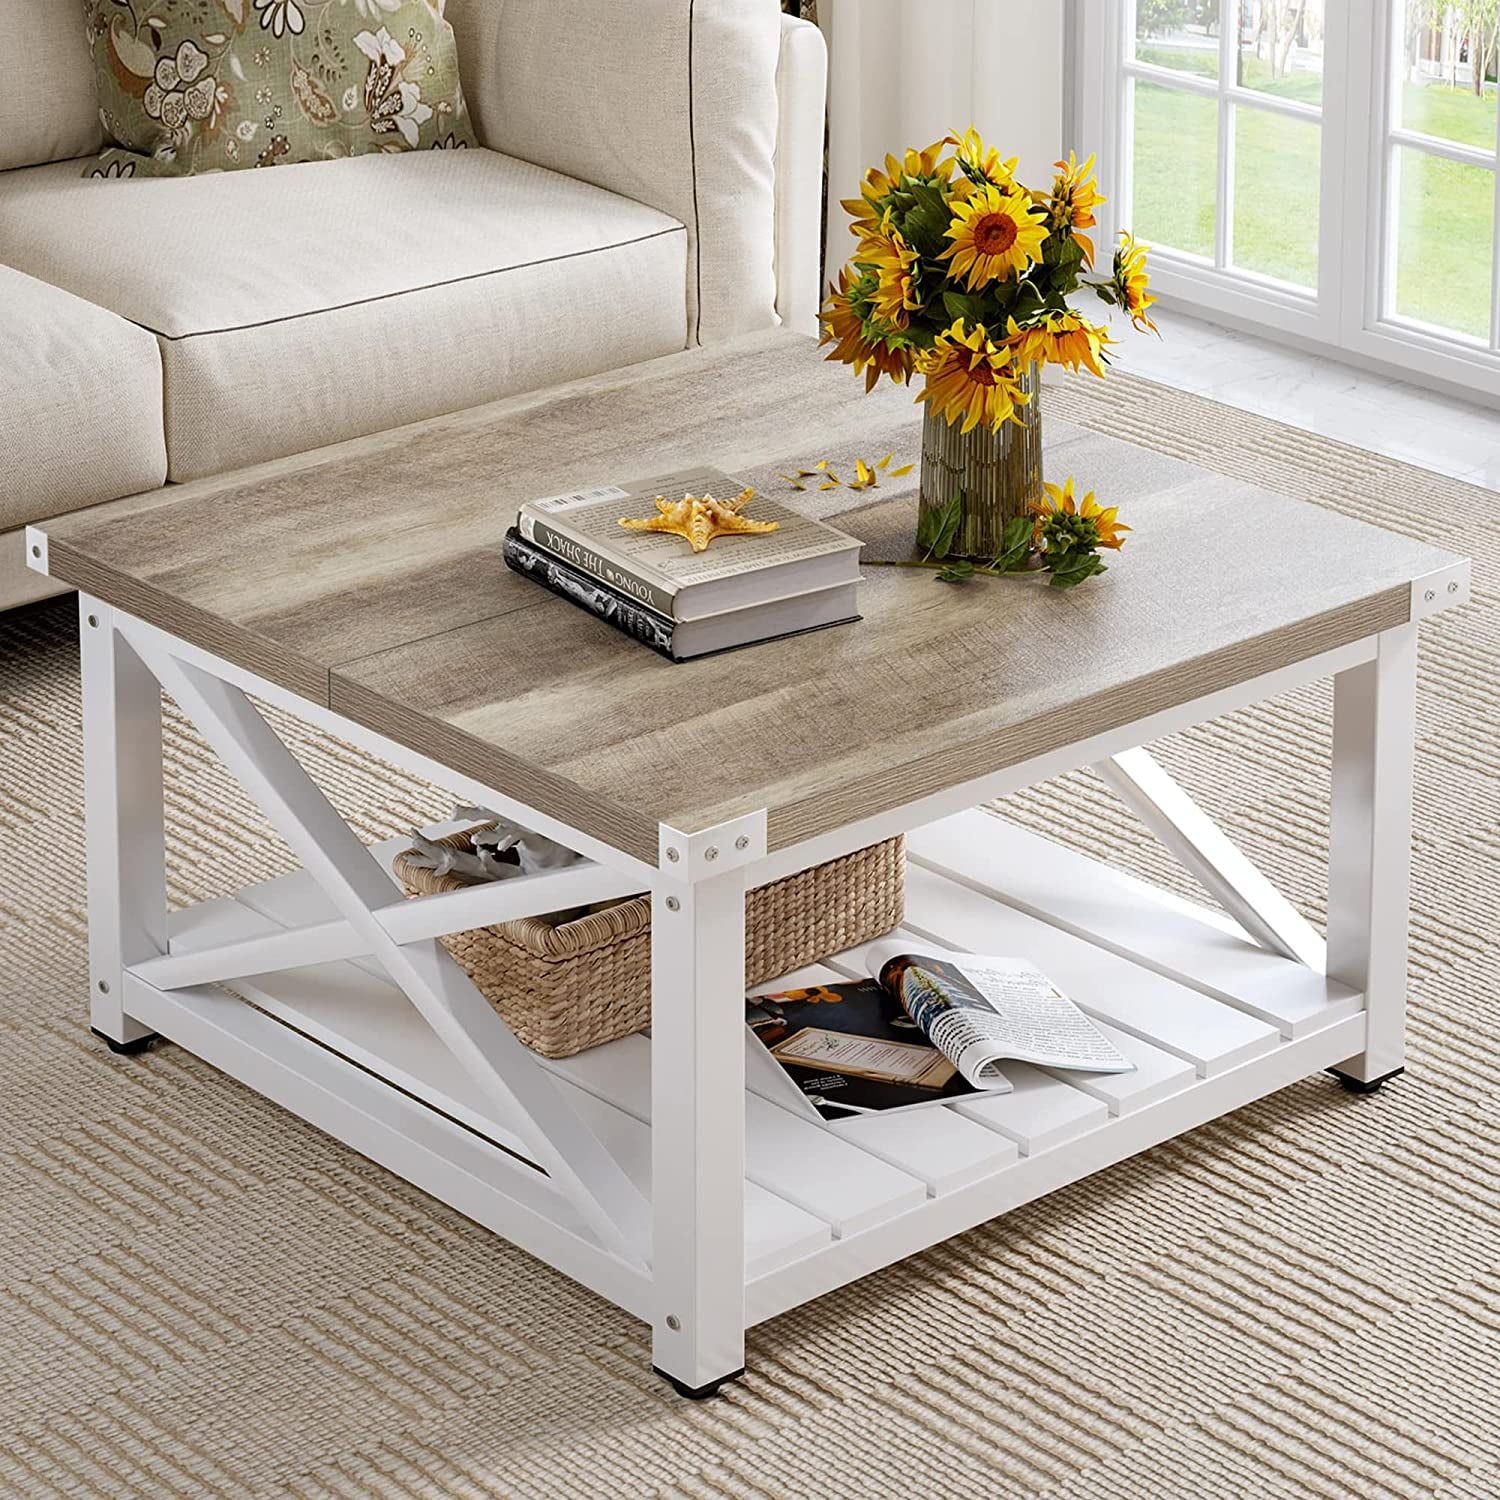 Dextrus Farmhouse Coffee Table For Living Room, Square Wood Coffee Table  With Open Storage Shelf – Walmart In Living Room Farmhouse Coffee Tables (Photo 5 of 15)